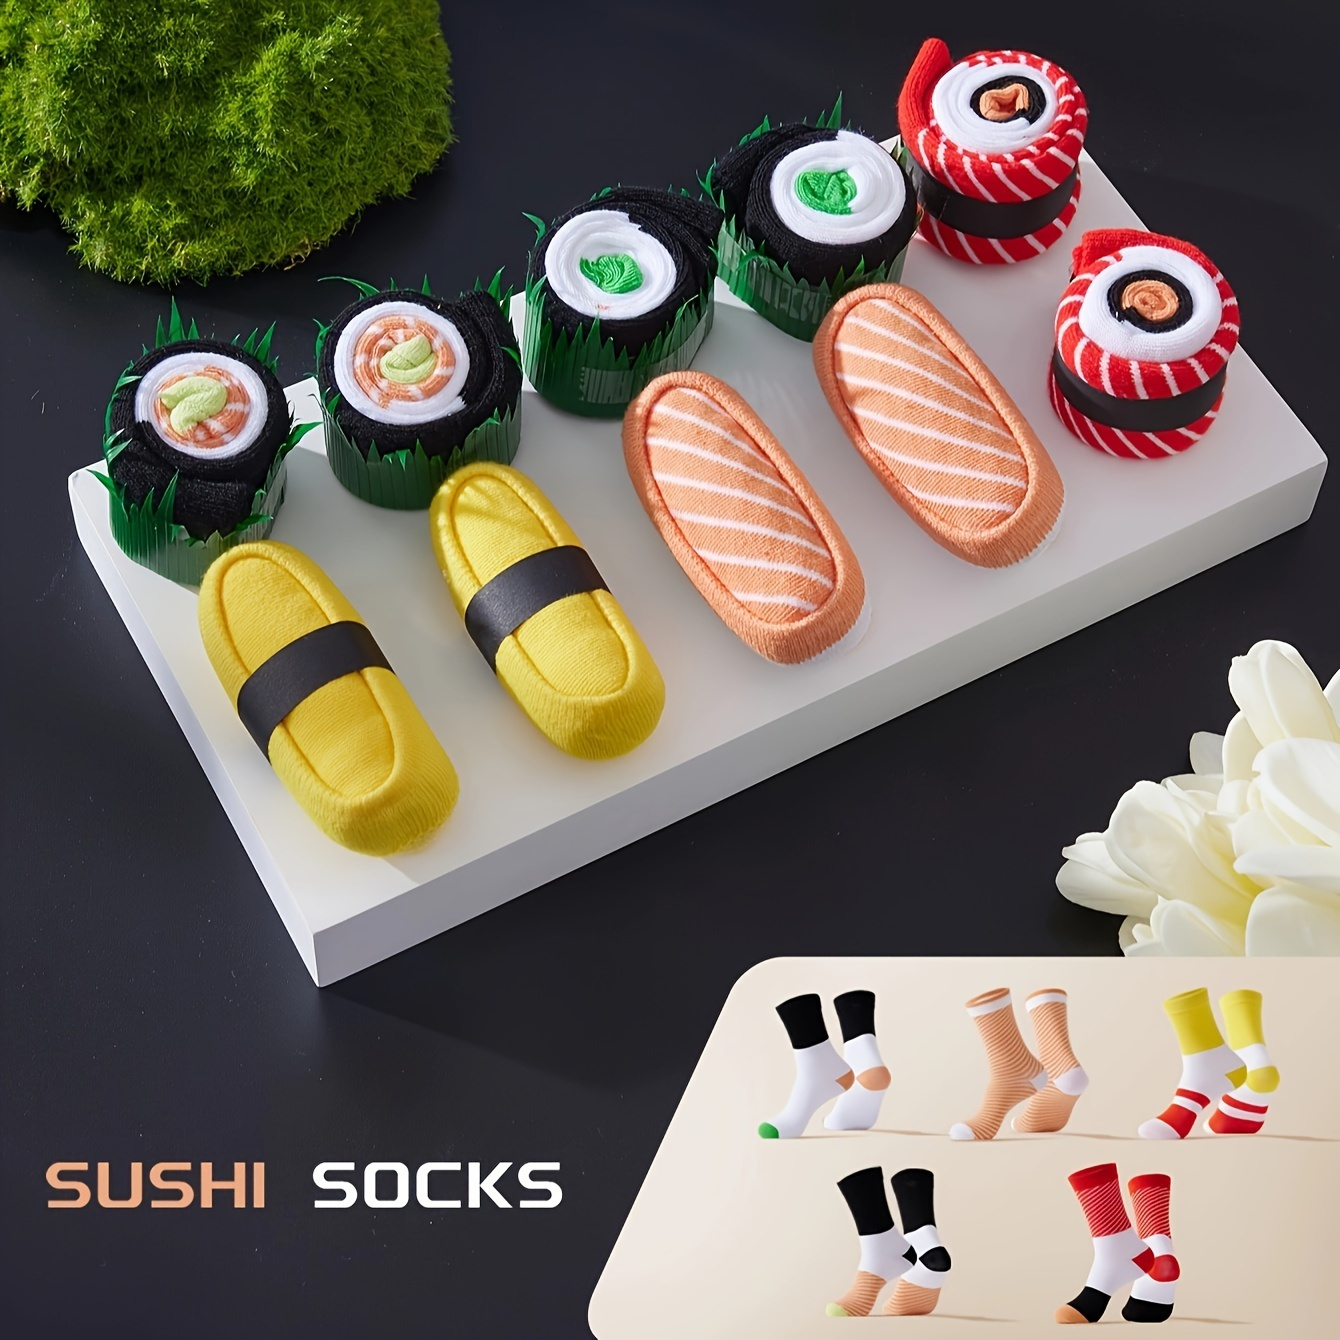 

5 Pairs Of Men's Fashion Fun Pattern Crew Socks With Sushi Design, Comfy & Breathable Elastic Socks, For Gifts, Parties And Daily Wearing